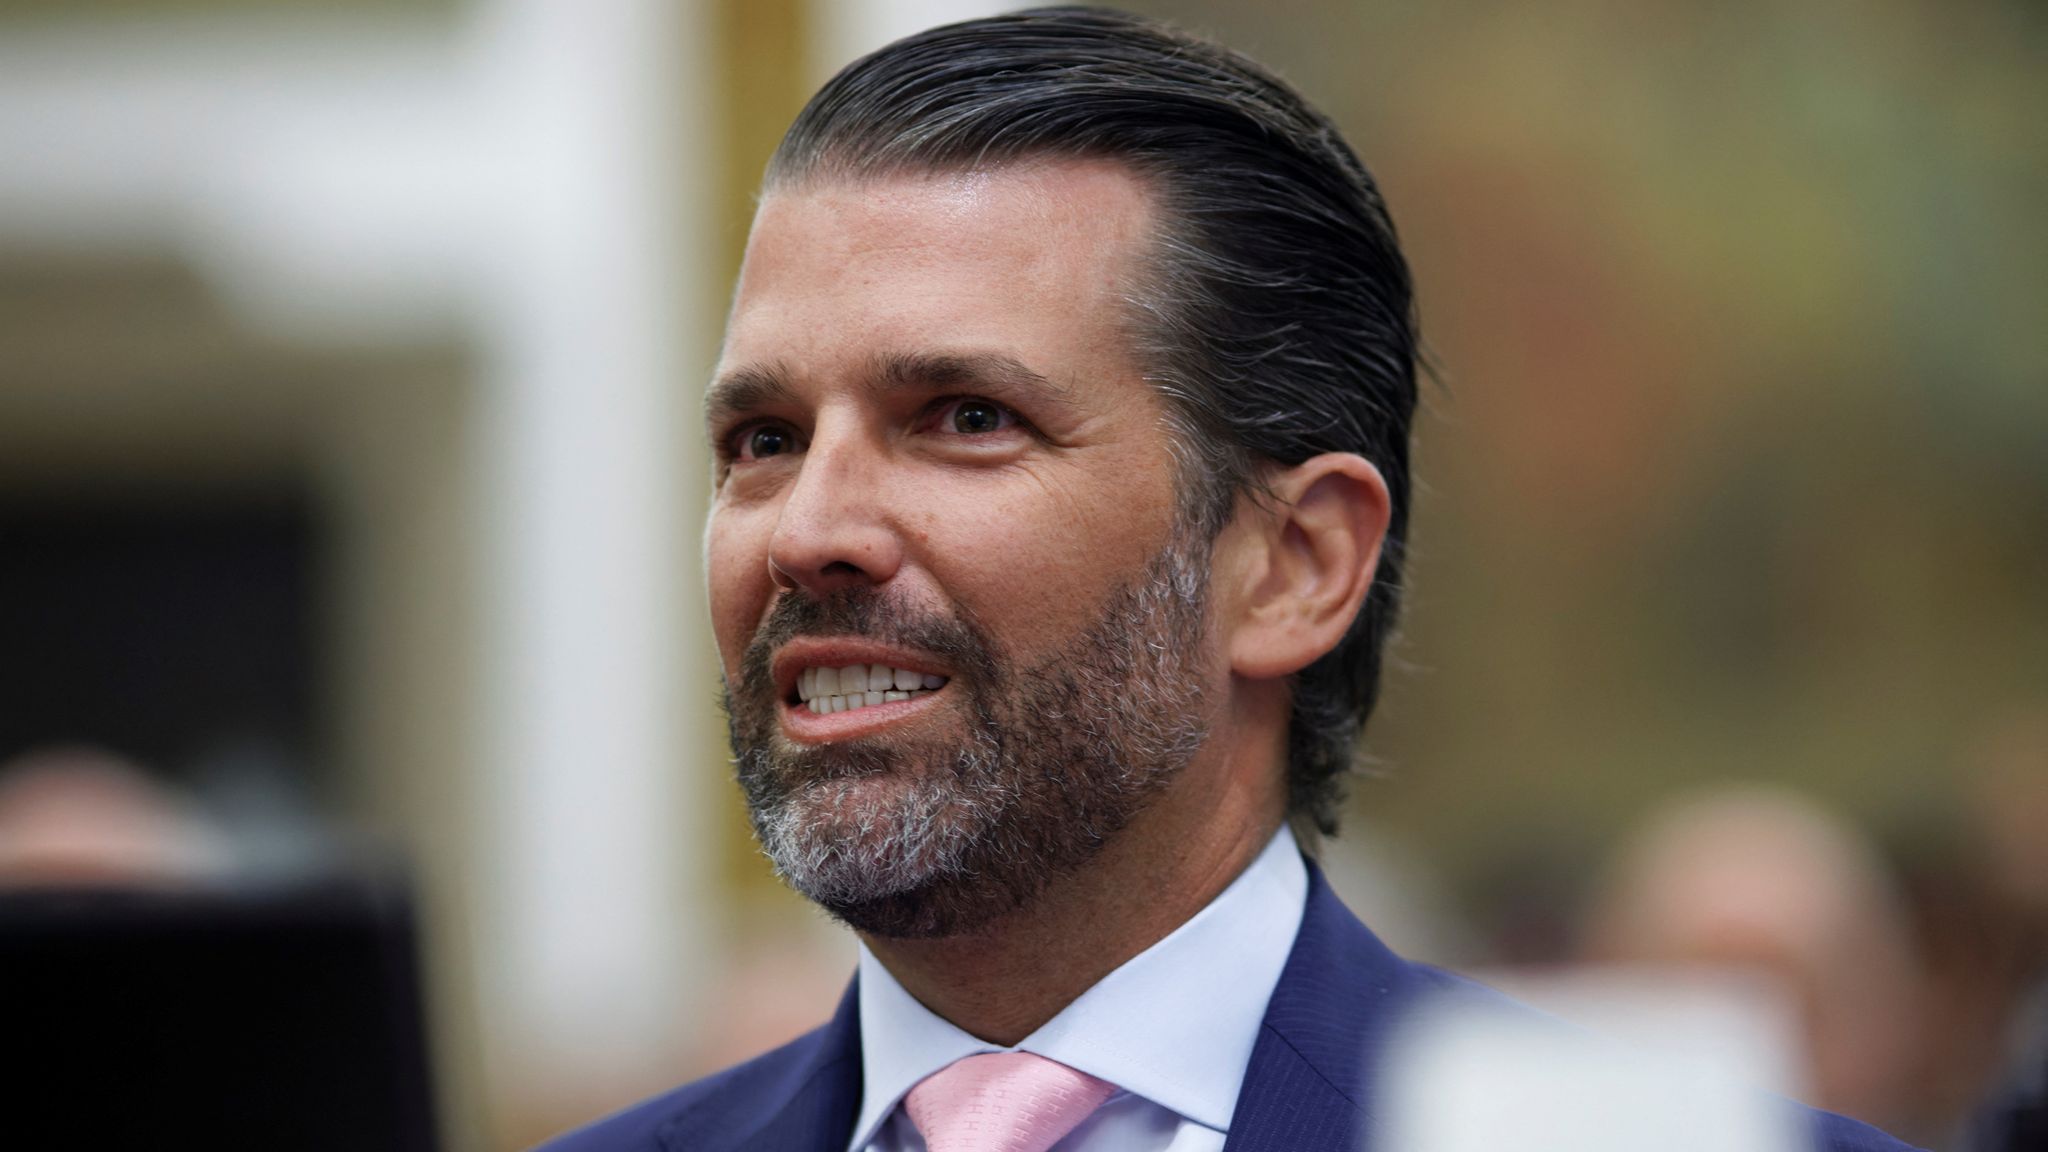 Donald Trump Jr receives death threat and unidentified white